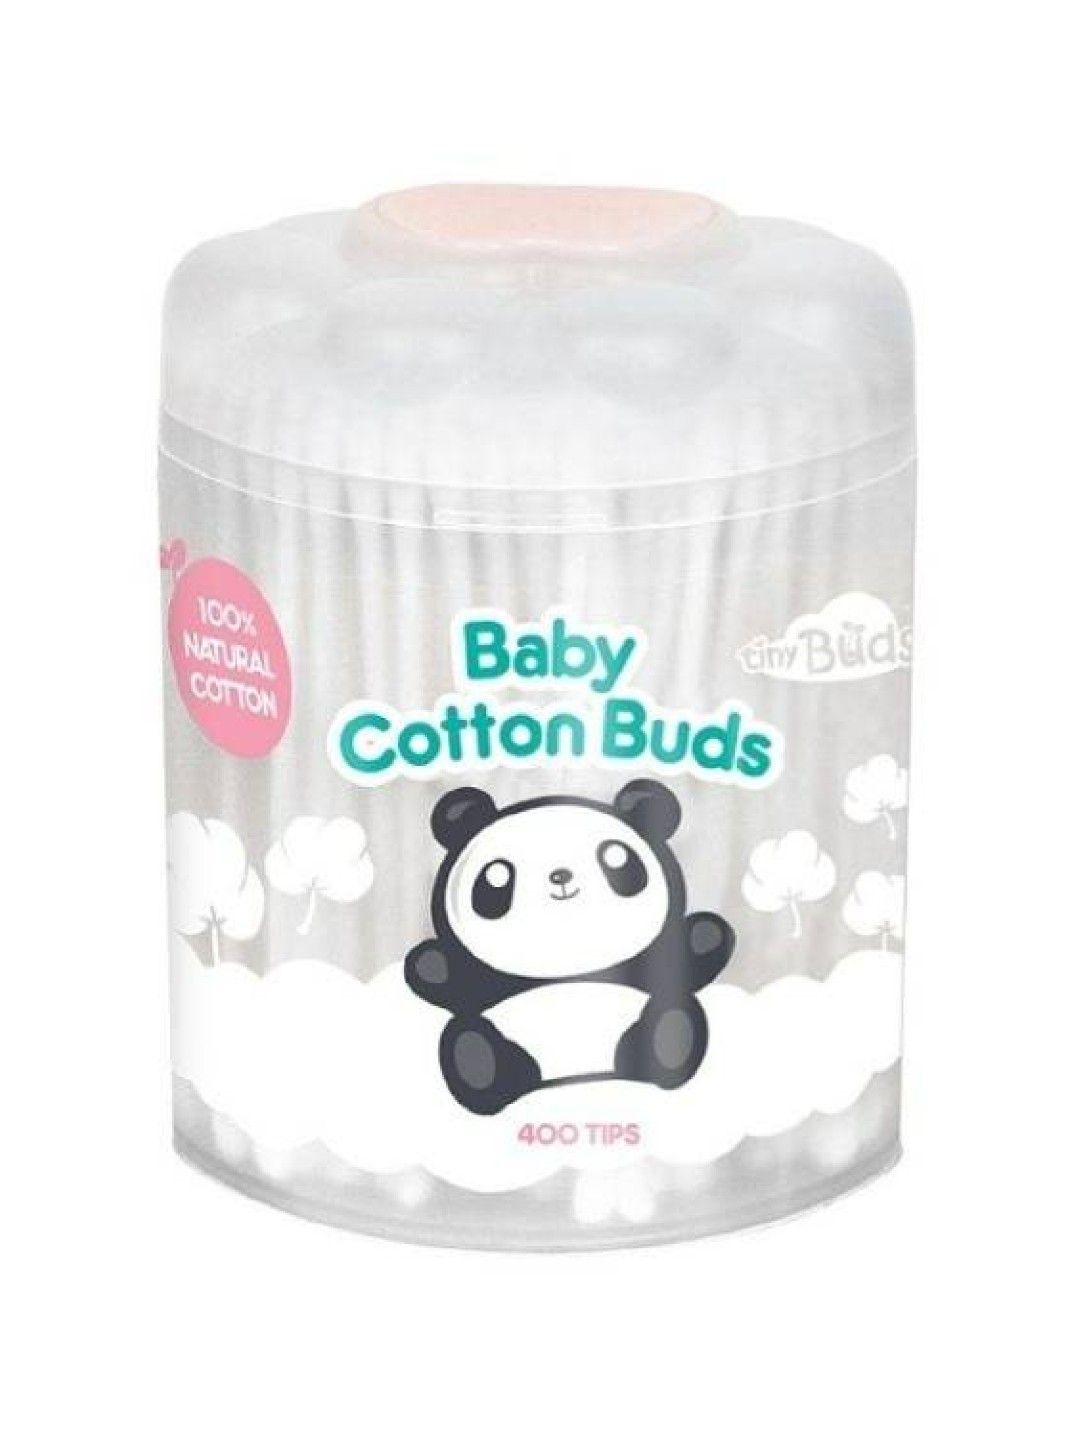 Tiny Buds Tiny Scooper Baby Cotton Buds 400 tips